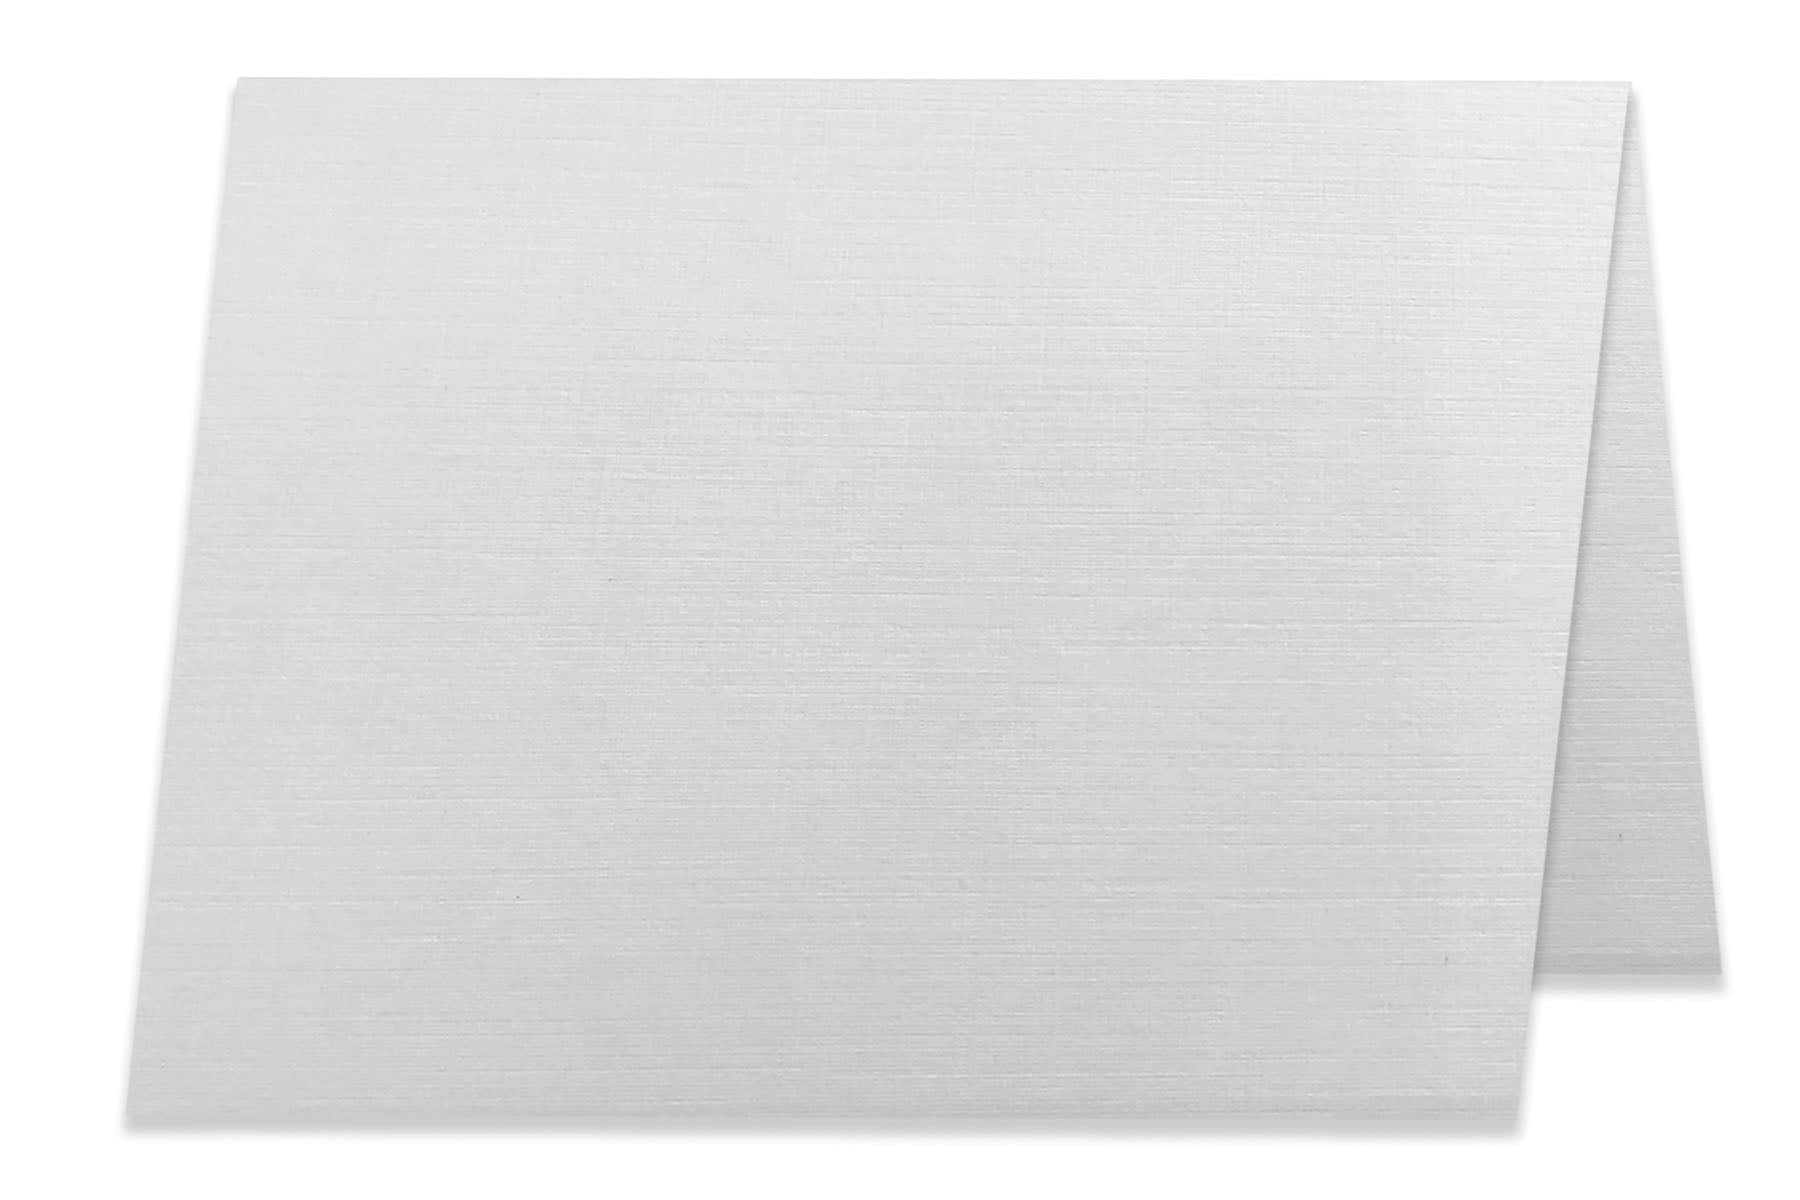 Hamilco Card Stock Folded Blank Cards with Envelopes 5x7 - Scored White  Cardstock Paper 80lb Cover - 100 Pack 